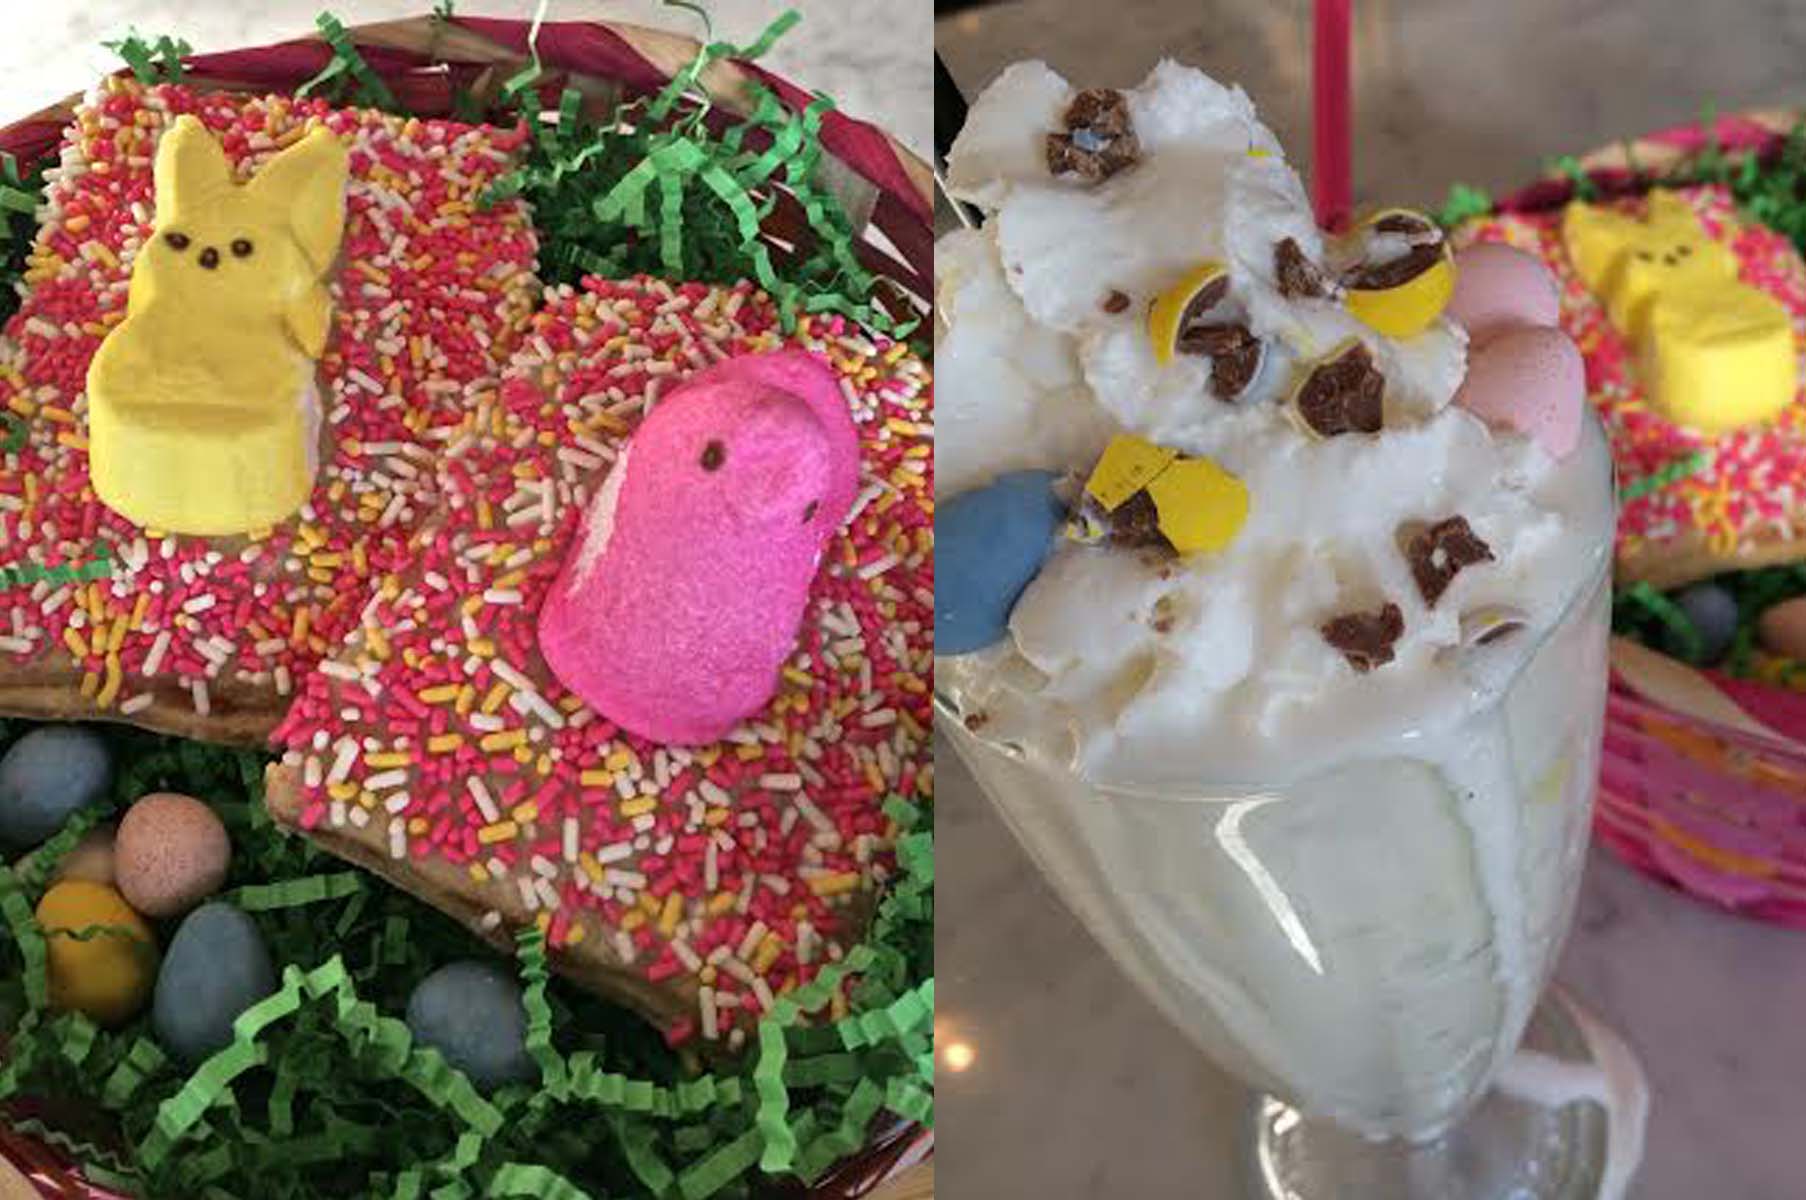 Ted's Bulletin is offer Peep Tarts and Robin's Egg shakes for Easter. (Photos: Ted's Bulletin)